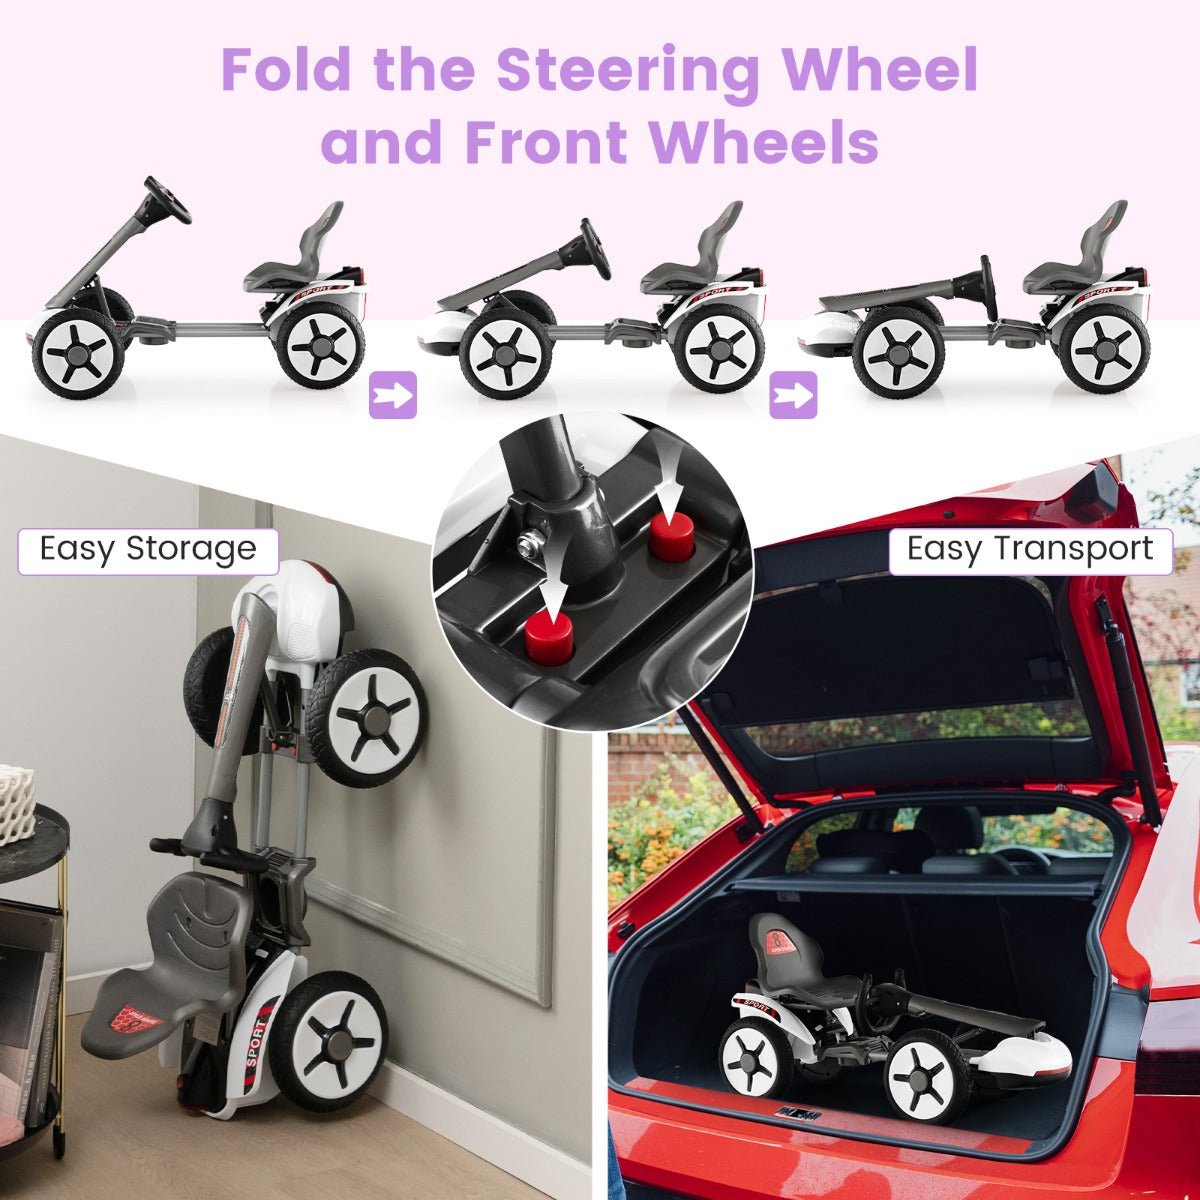 Foldable Go Kart for Easy Storage and Transport